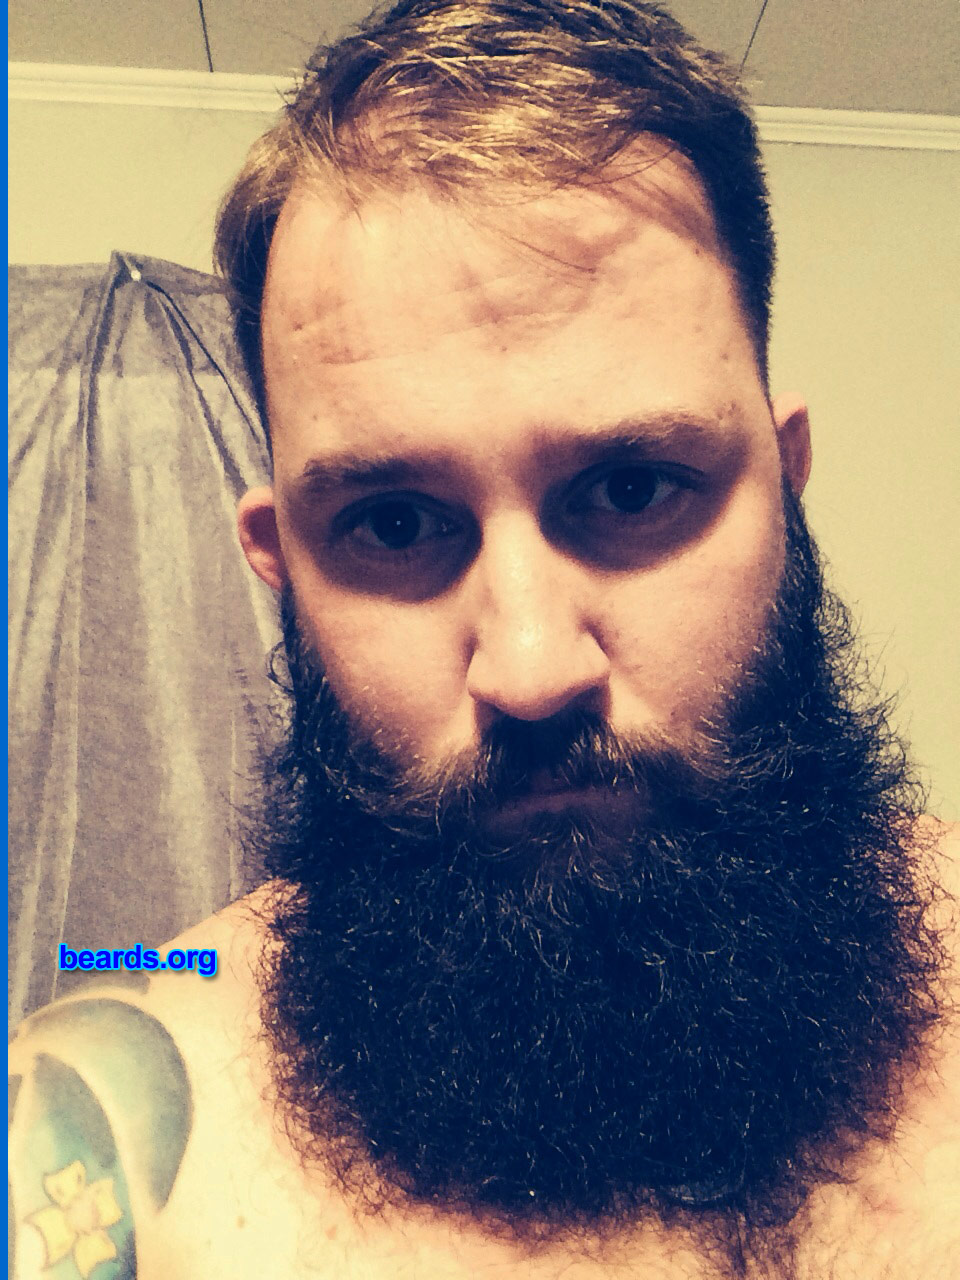 Stephen
Bearded since: 2011. I am a dedicated, permanent beard grower.

Comments:
Why did I grow my beard? After I got out of the military I figured I'd let it grow as a "freedom beard" because I was sick of shaving twice a day! It's here to stay, though! Razors are expensive anyway.

How do I feel about my beard? I love it.
Keywords: full_beard